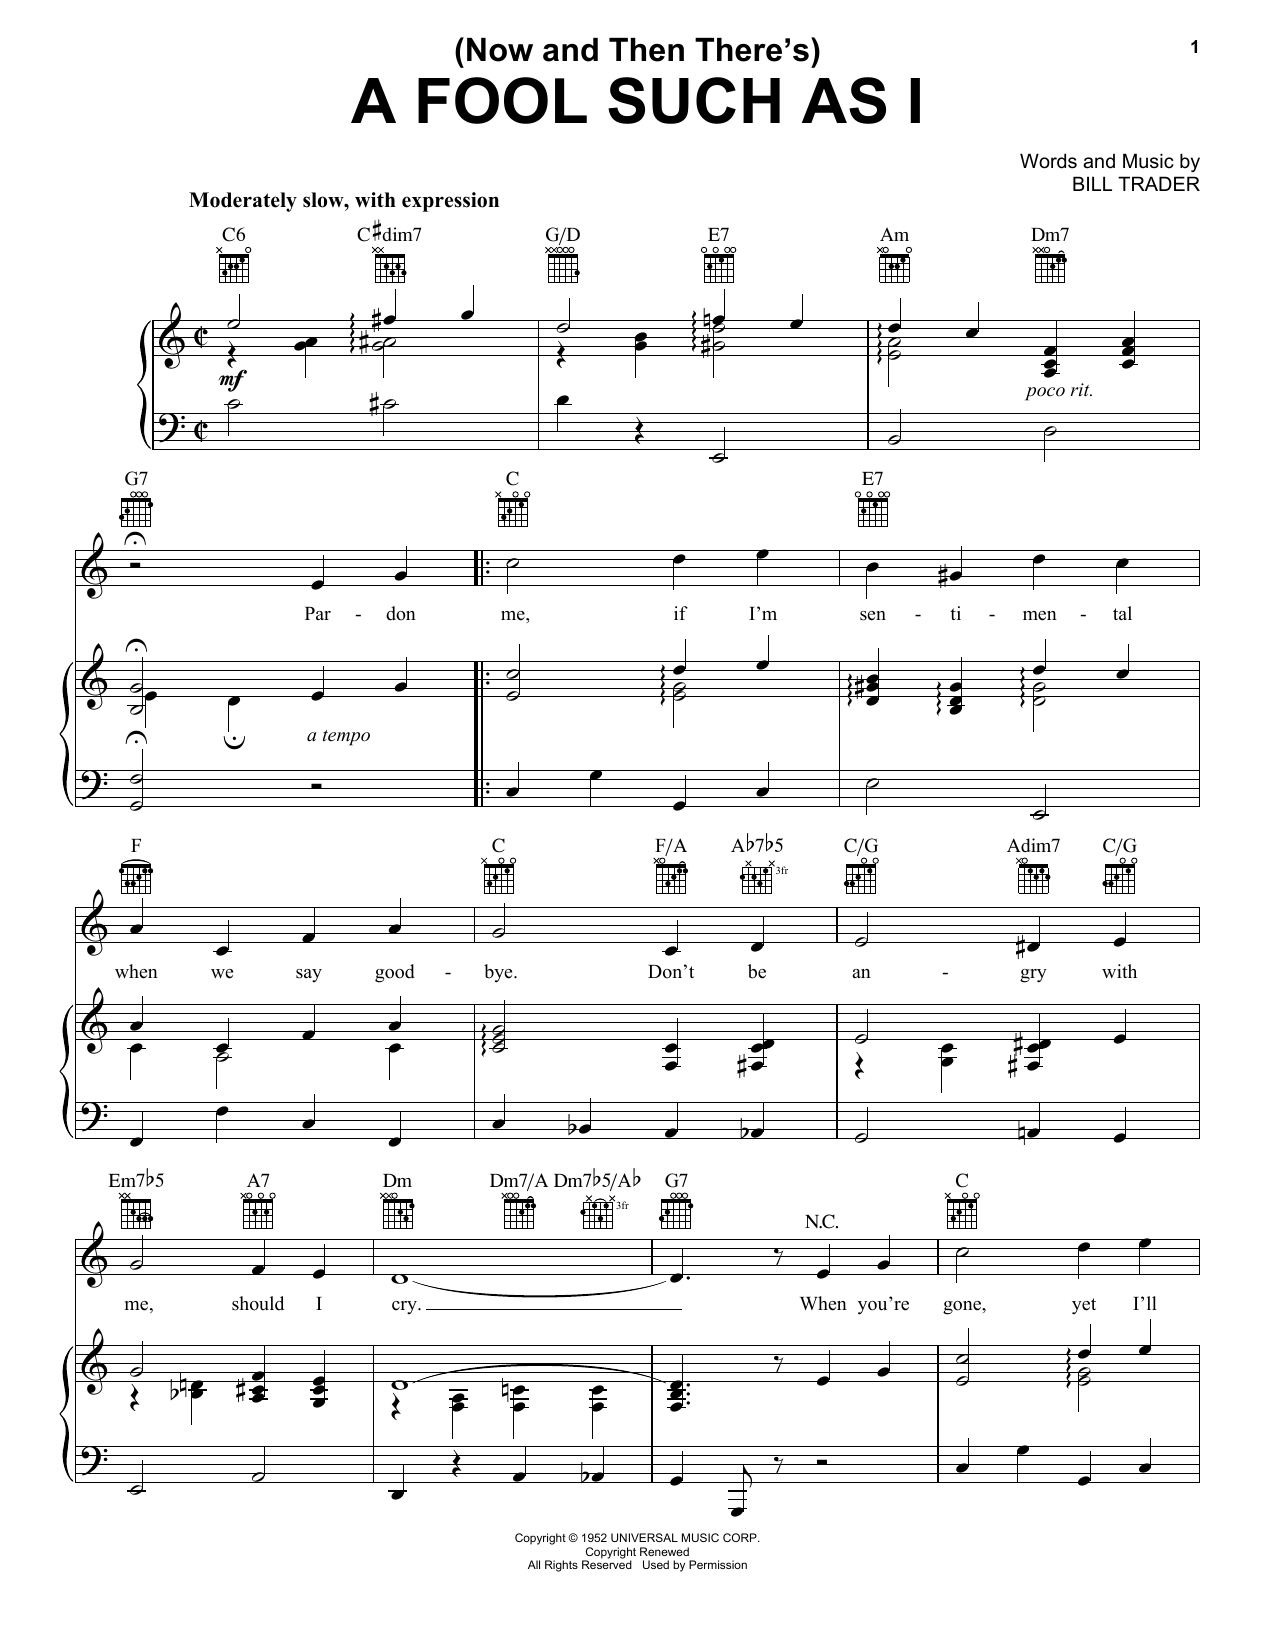 Download Elvis Presley (Now And Then There's) A Fool Such As I Sheet Music